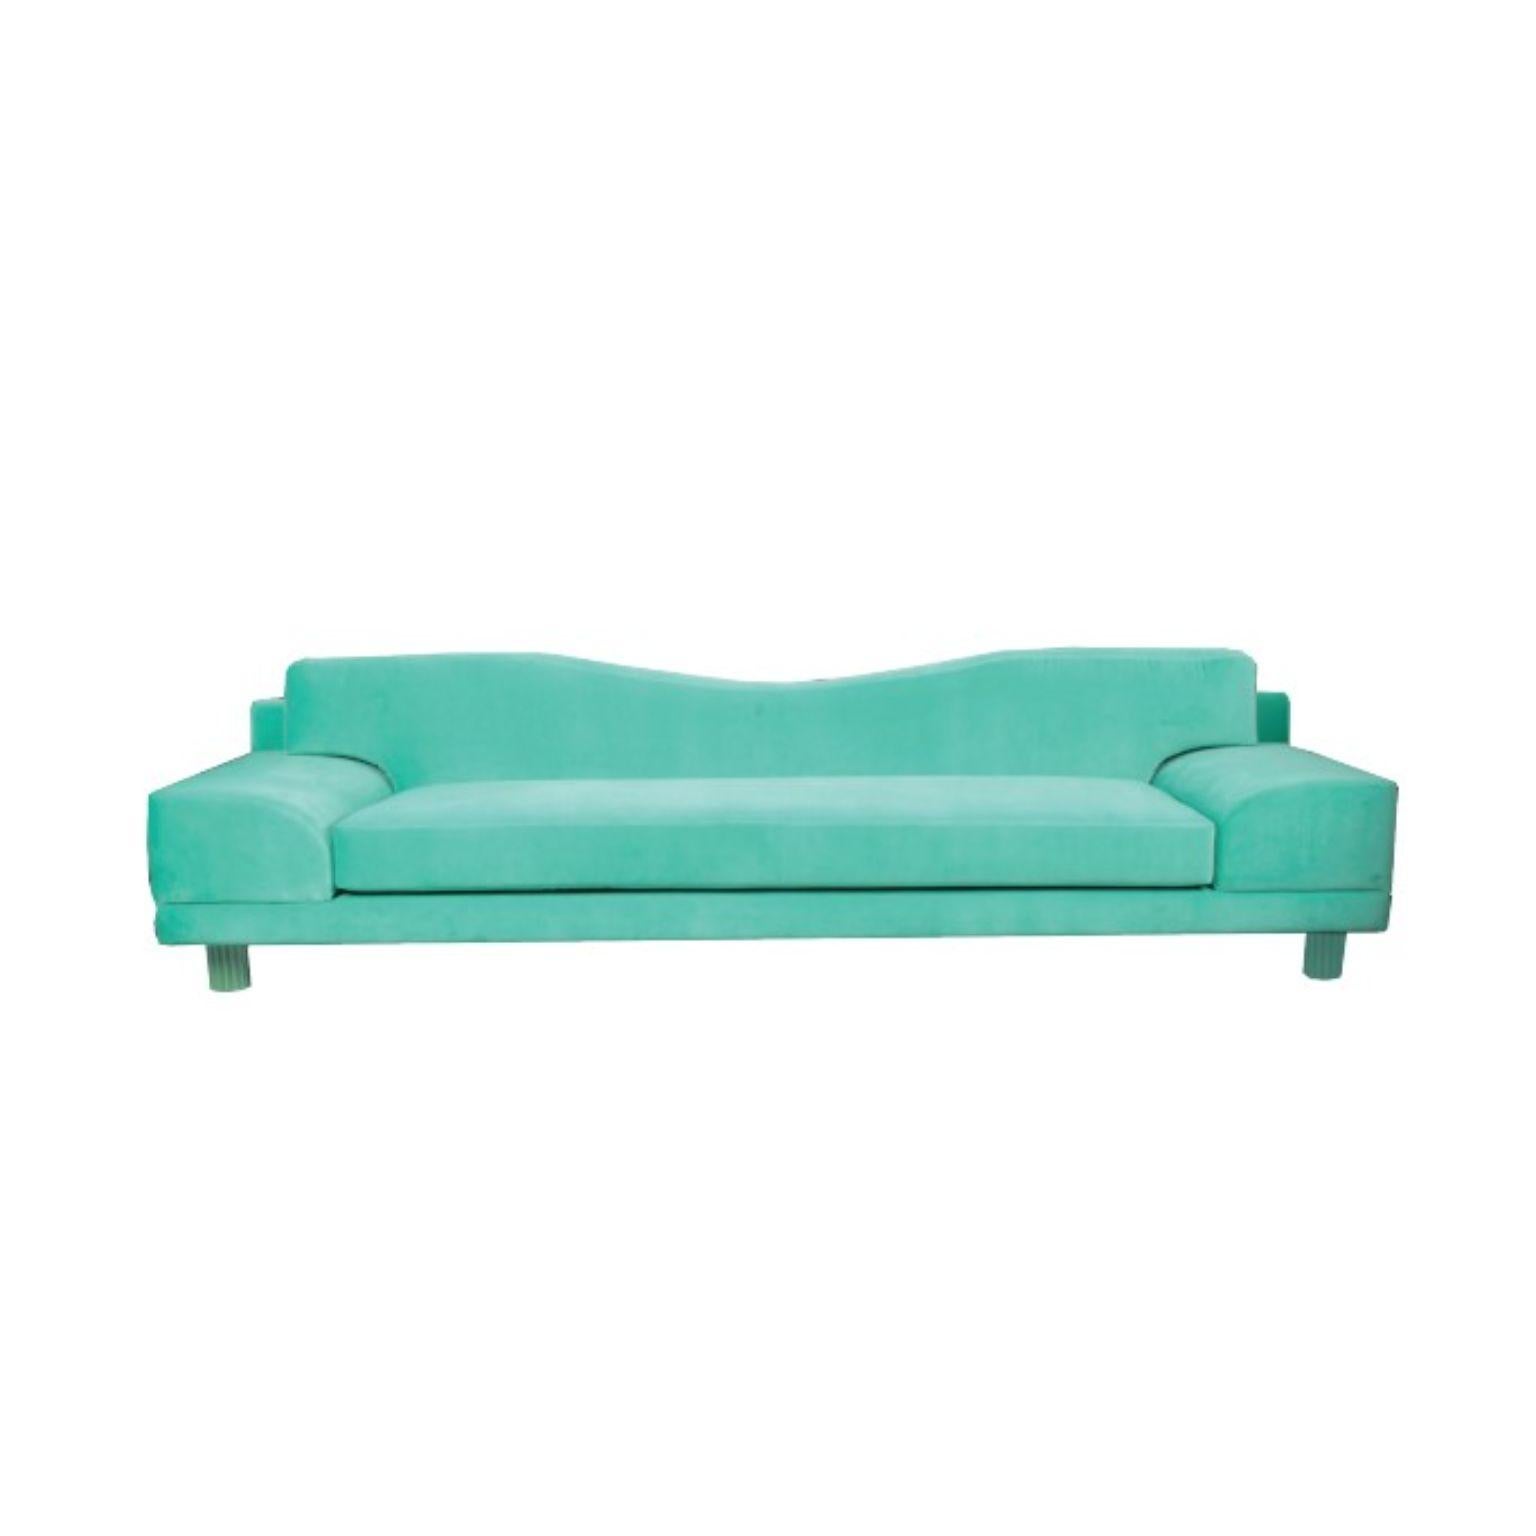 Dyoni sofa by Moure Studio
Dimensions: D 250x W 95 x H 76 cm
Materials: cotton, linen, velvet, felt, Wood.

Wide range of colors of feet and fabrics available in the color ranges.

Dionysus, god of wine in Greek mythology and son of Zeus,